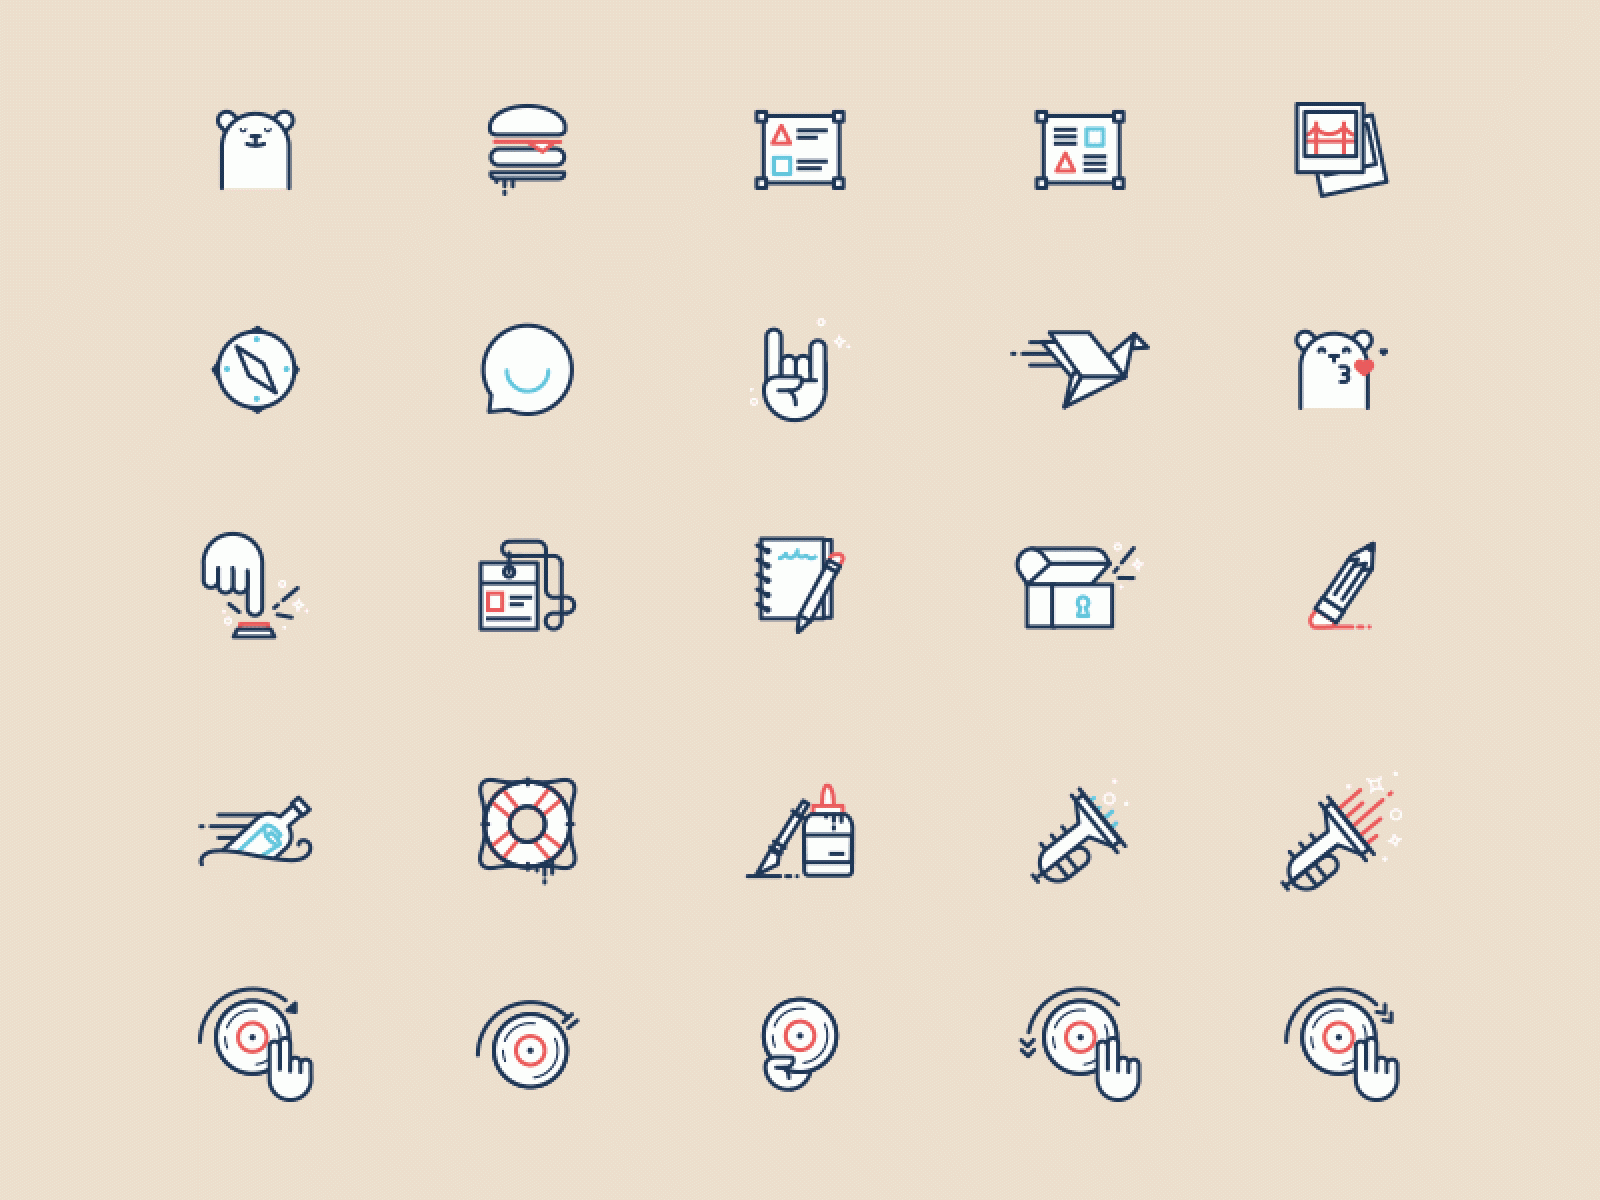 Figma Free Iconset Vol. 2 for Figma and Adobe XD